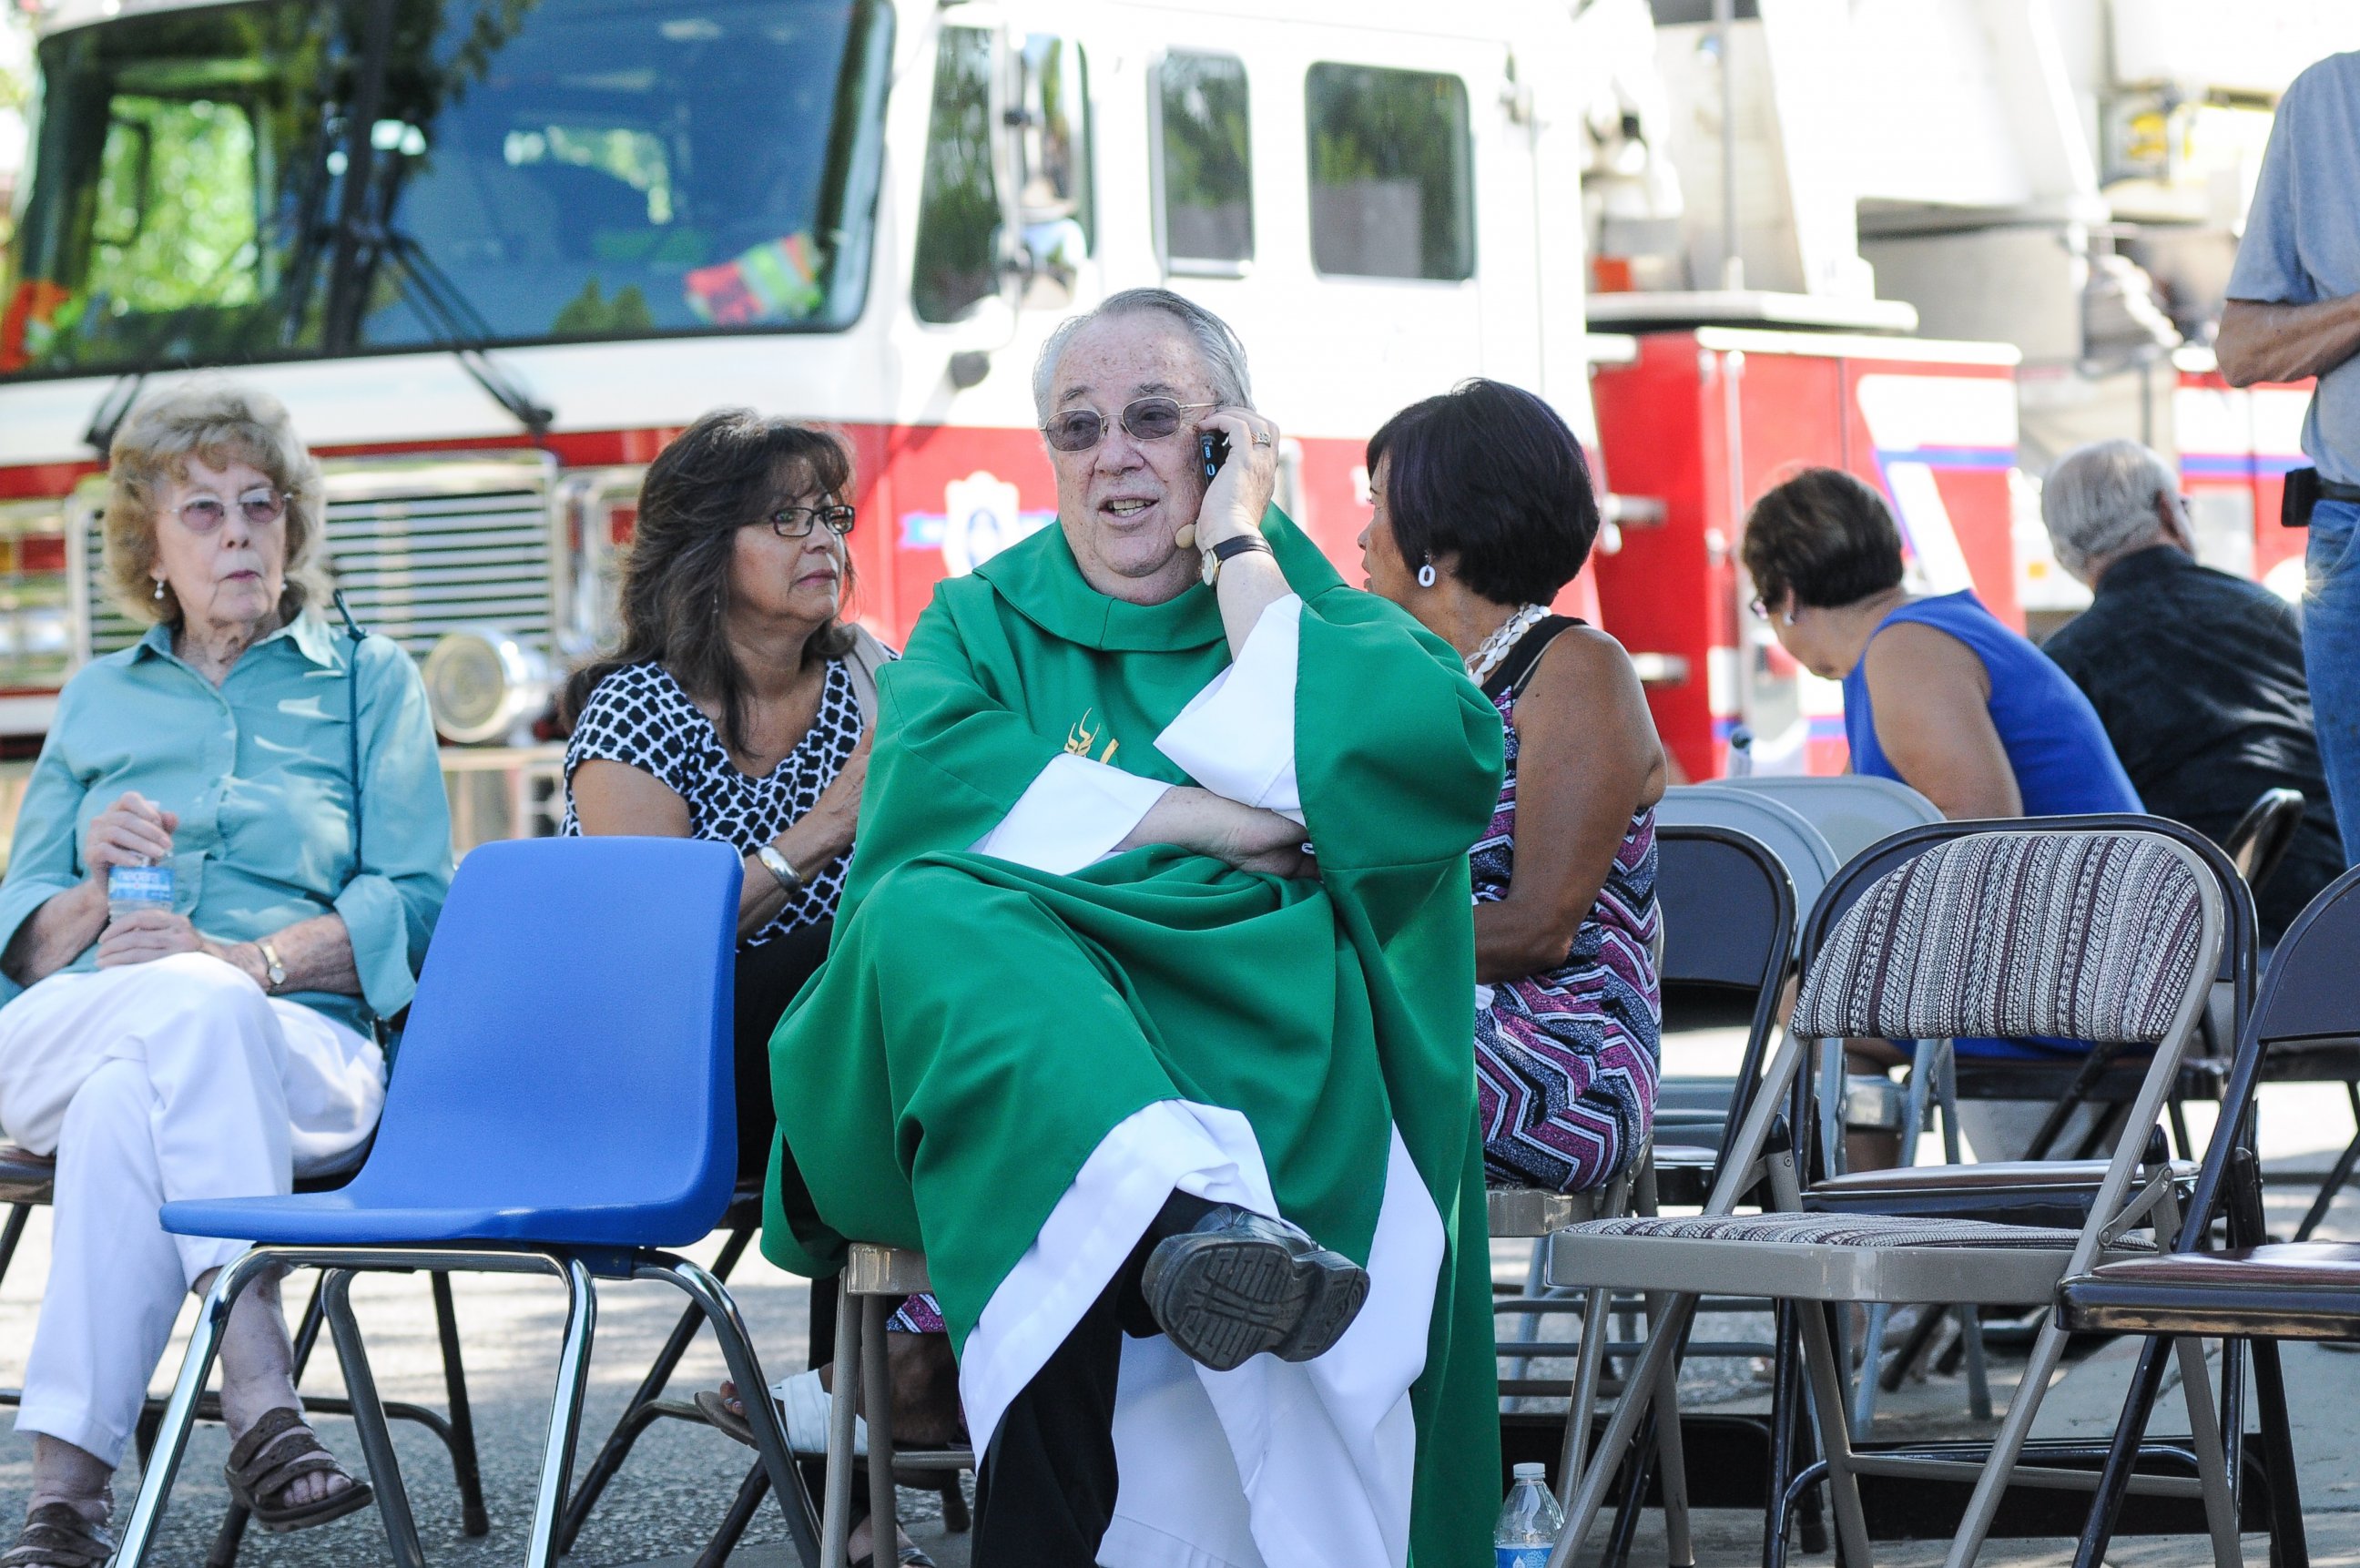 PHOTO: While waiting in a staging area, Holy Cross Catholic Church Pastor John Anderson tries to get in touch with other local churches to warn them of the two explosions that occurred and to be vigilant, Aug. 2, 2015, in Las Cruces, N.M.